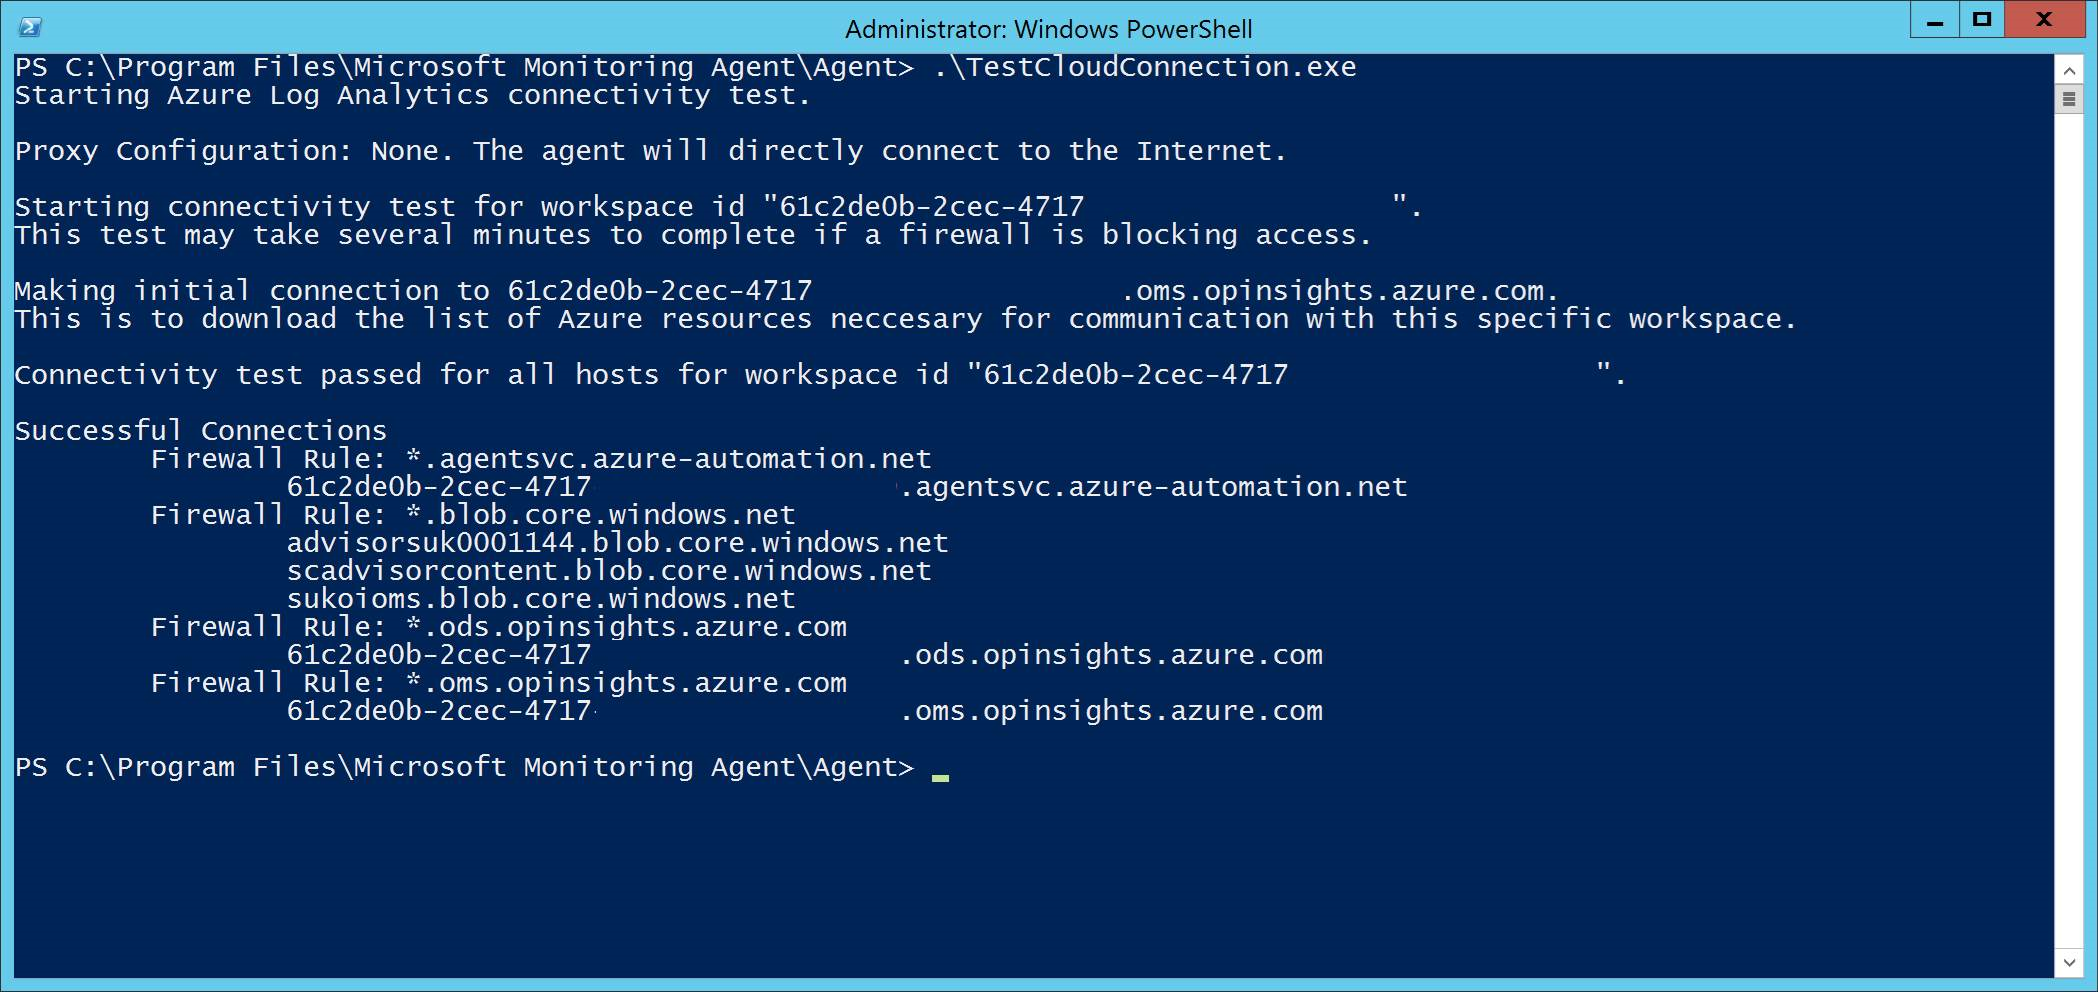 The administrator in Windows PowerShell